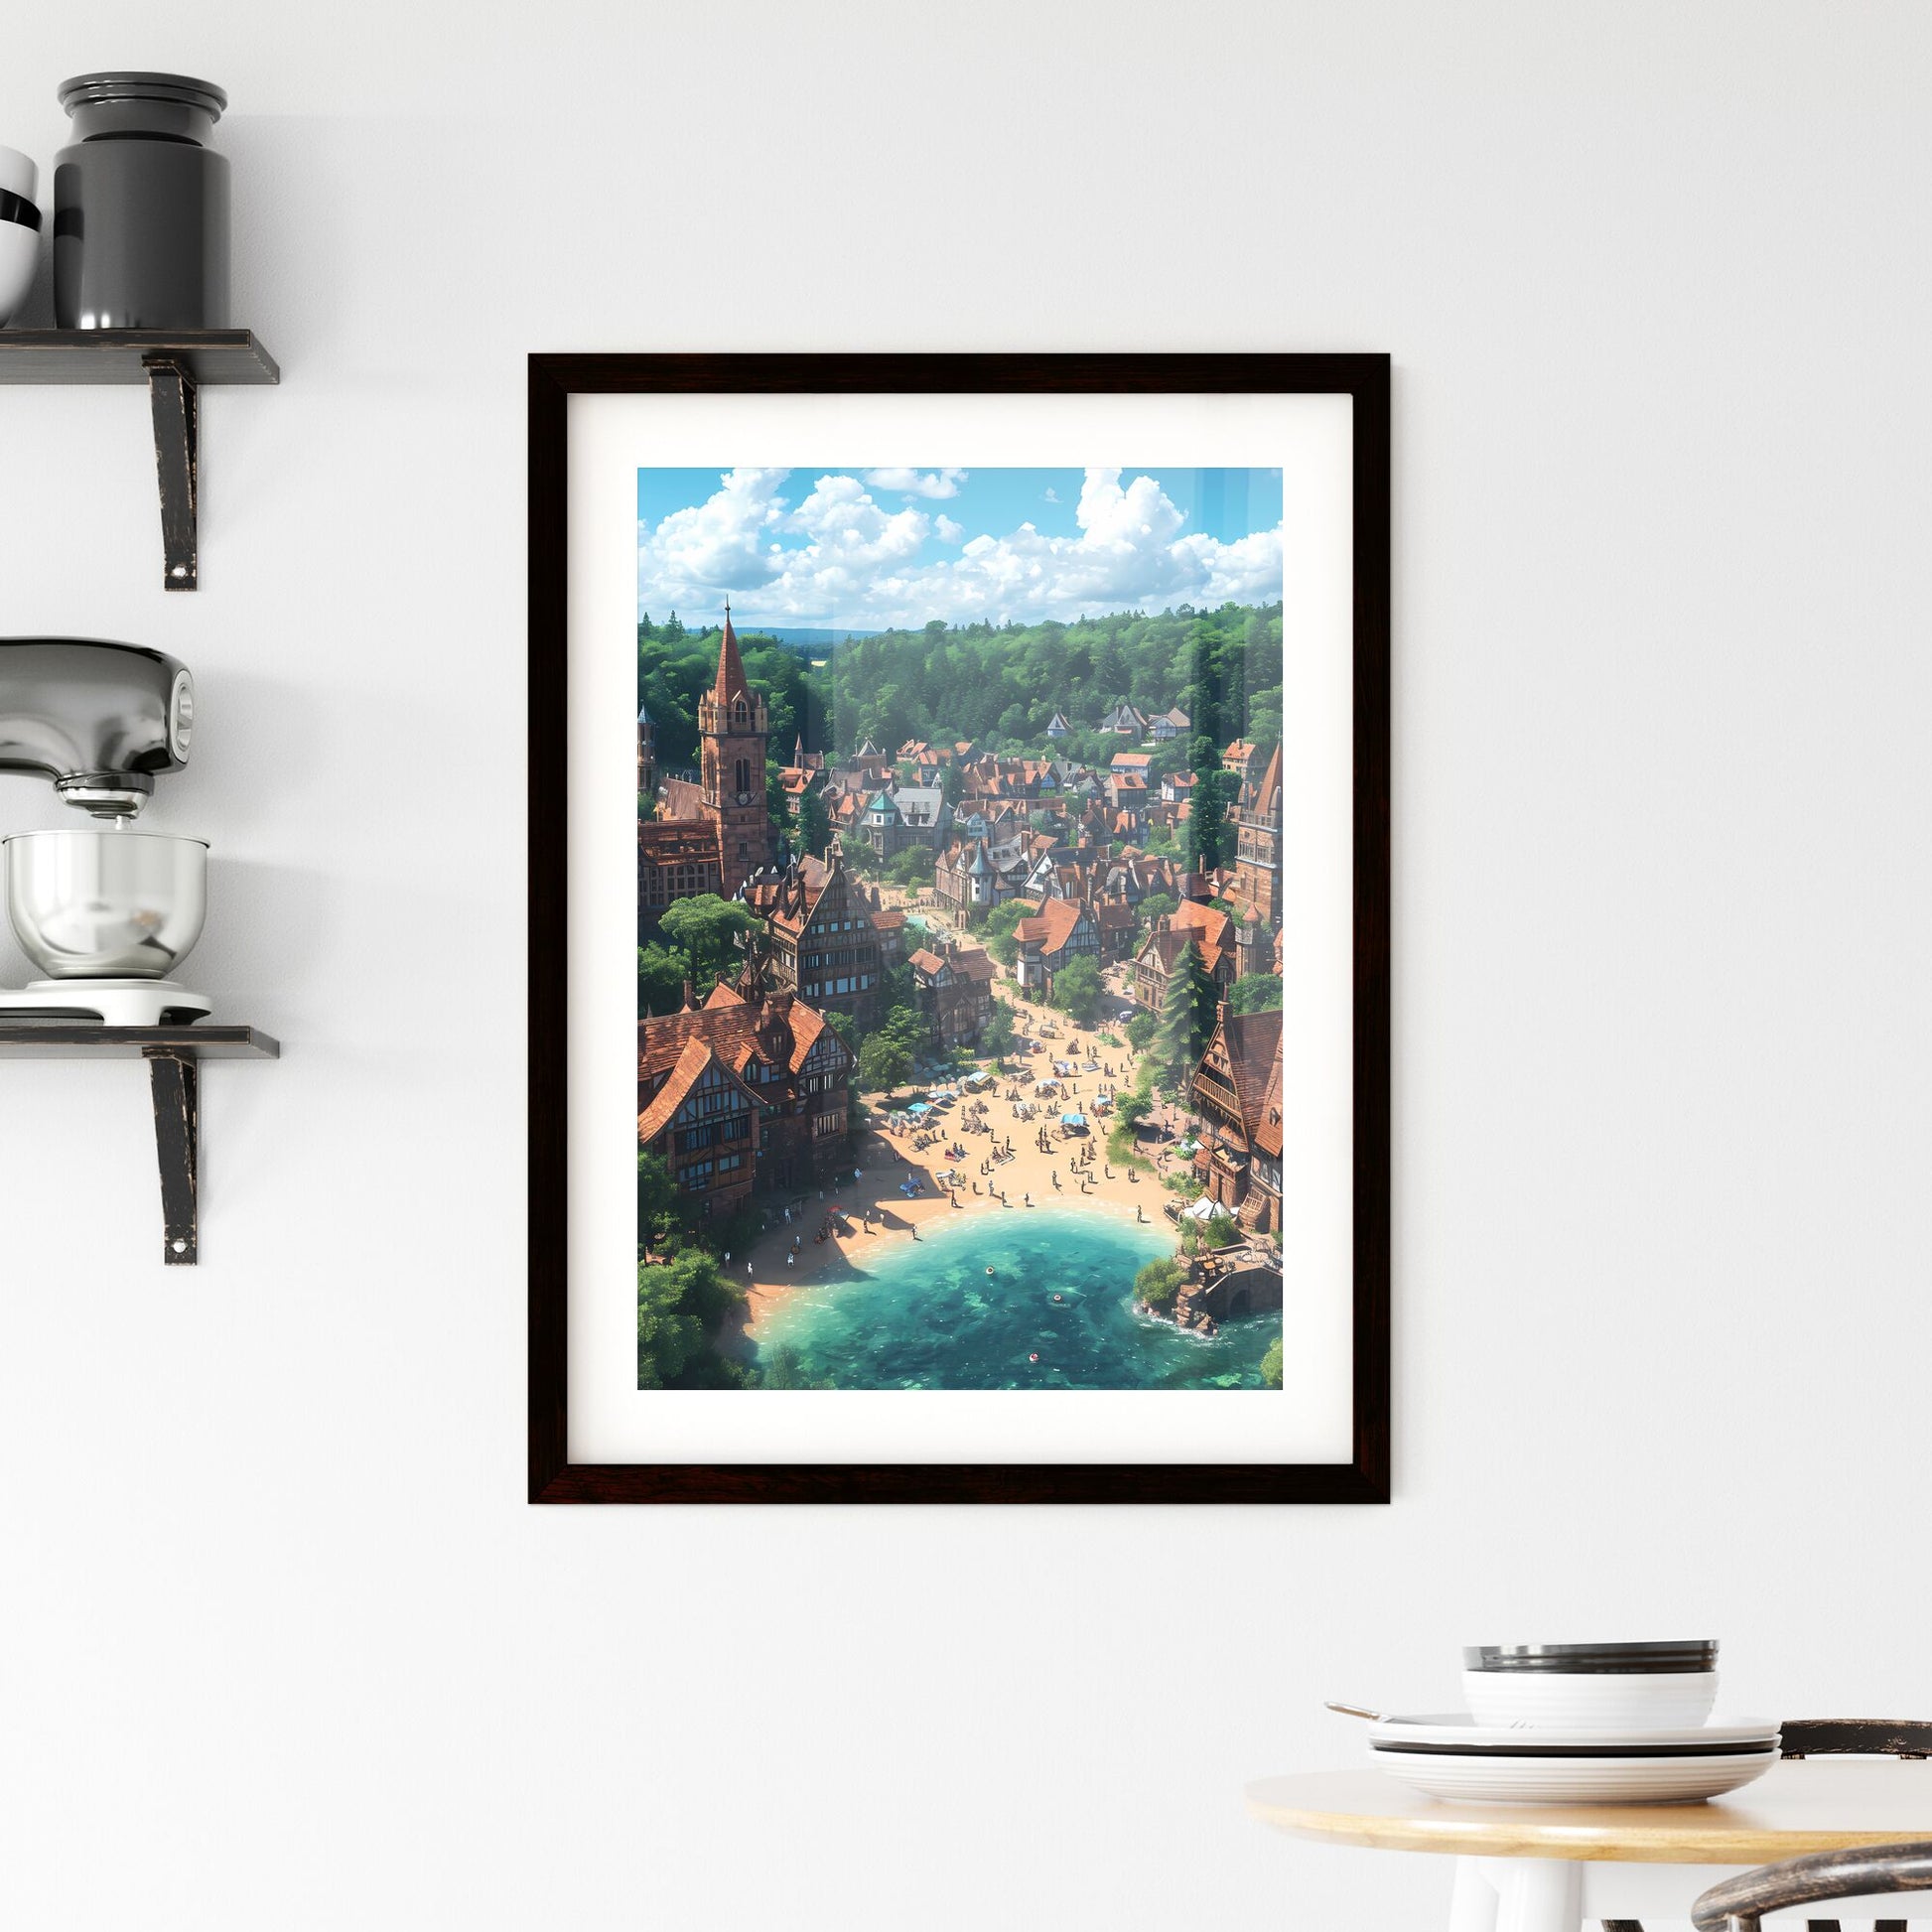 A landscape of the German countryside - Art print of a town with many buildings and a beach Default Title